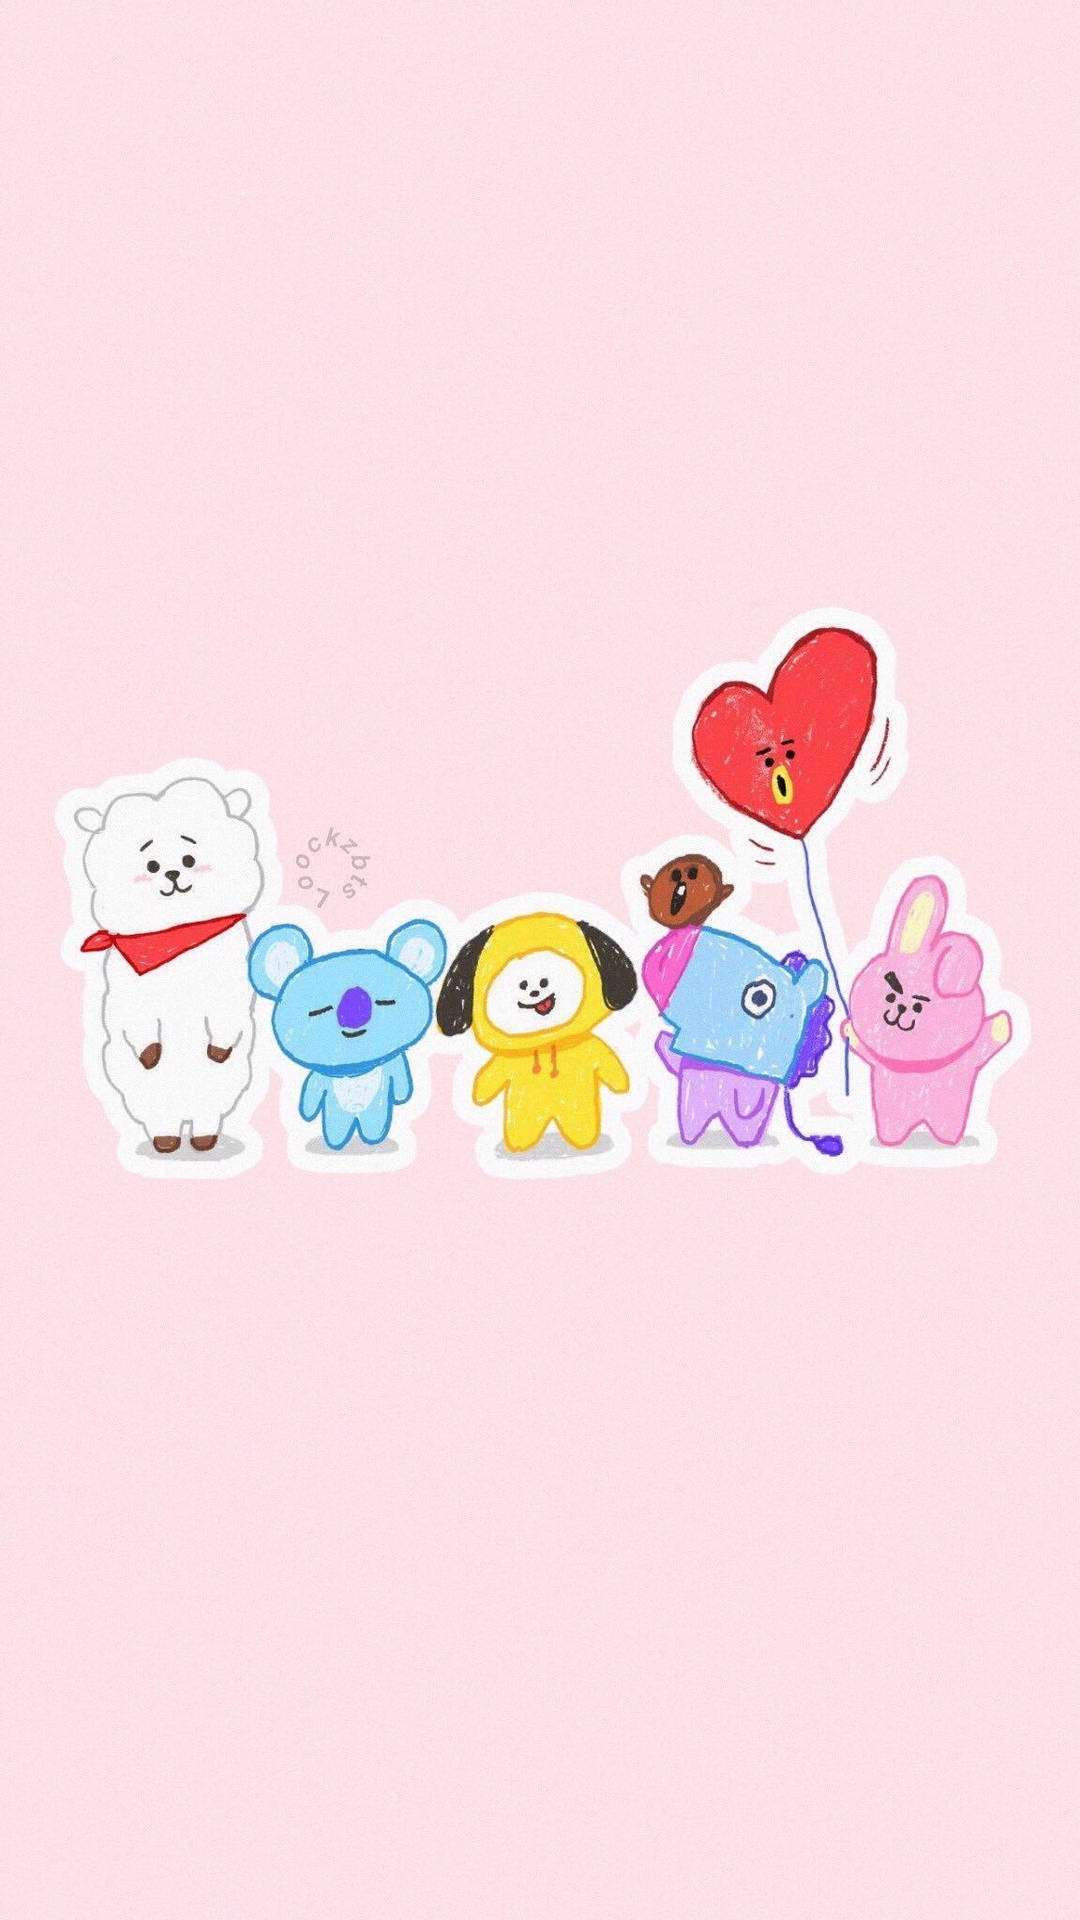 Cute Bt21 Character Stickers Background